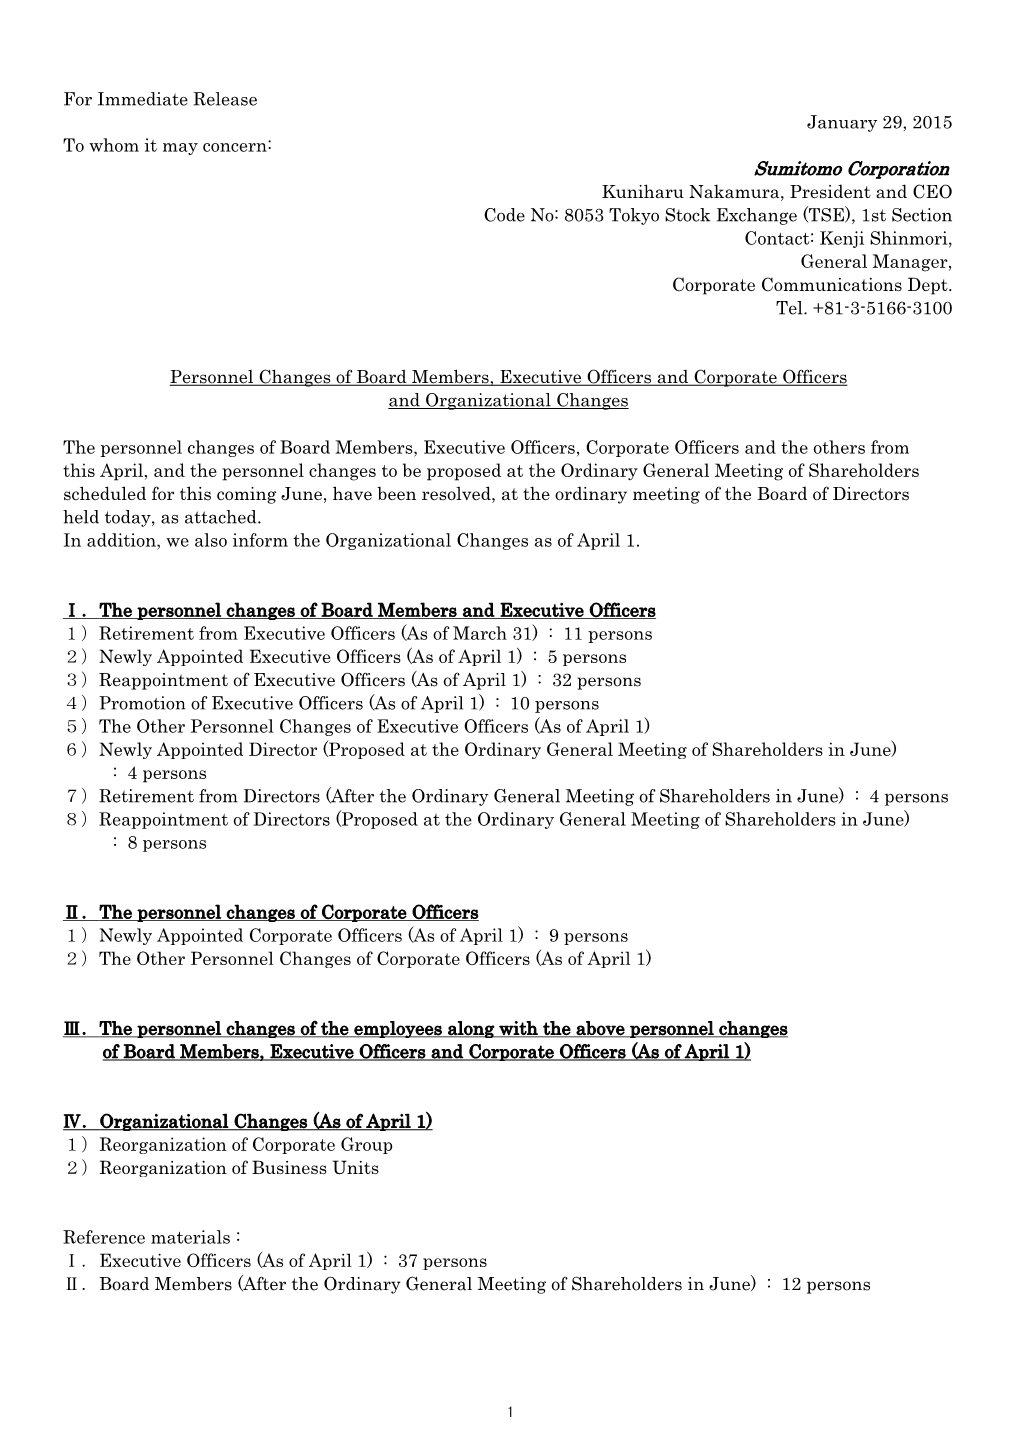 Jan. 29, 2015 Personnel Changes of Board Members, Executive Officers